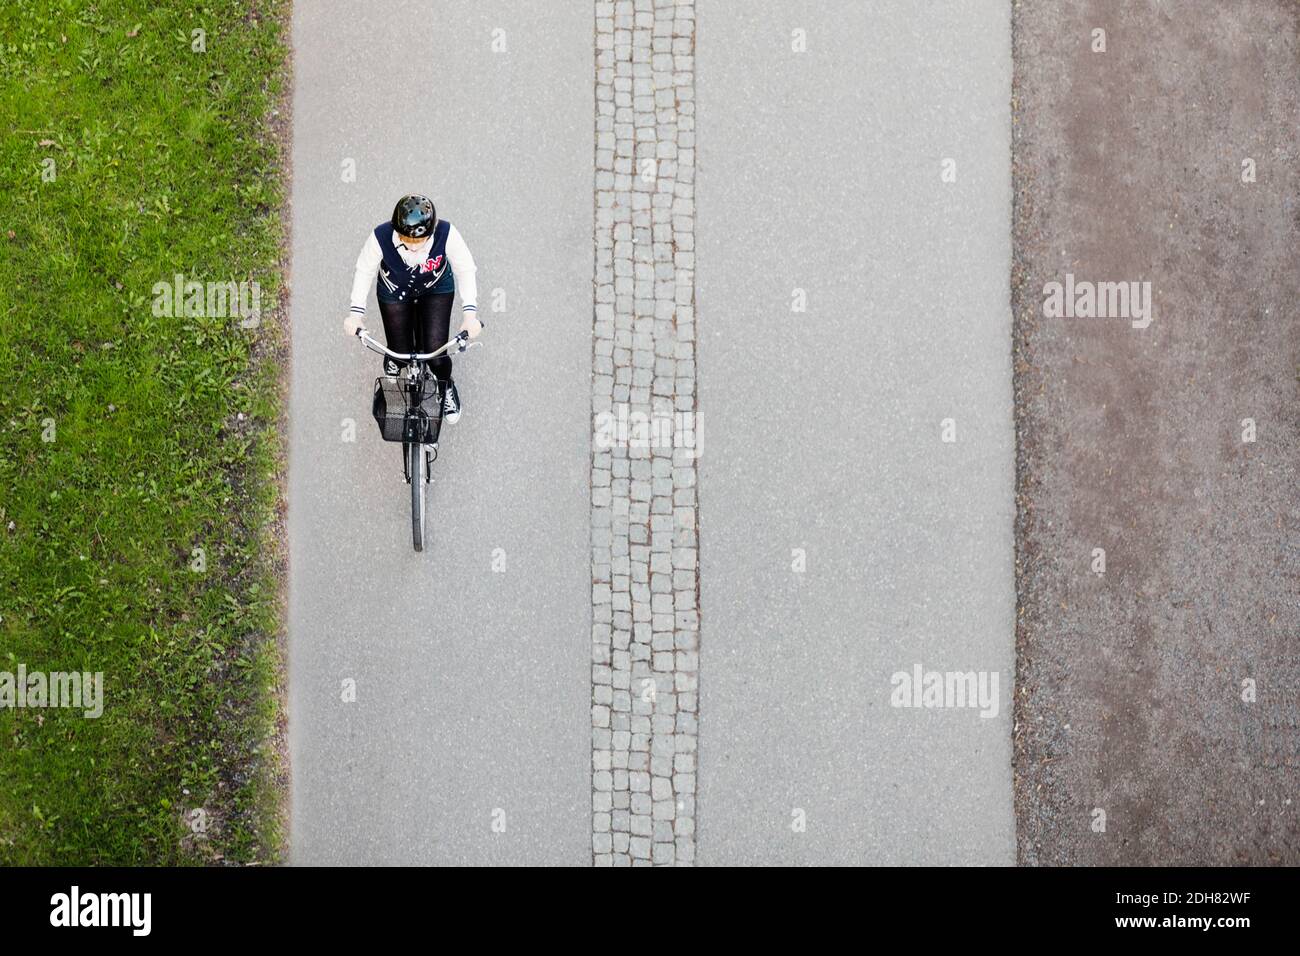 High angle view of businesswoman riding bicycle on road Stock Photo